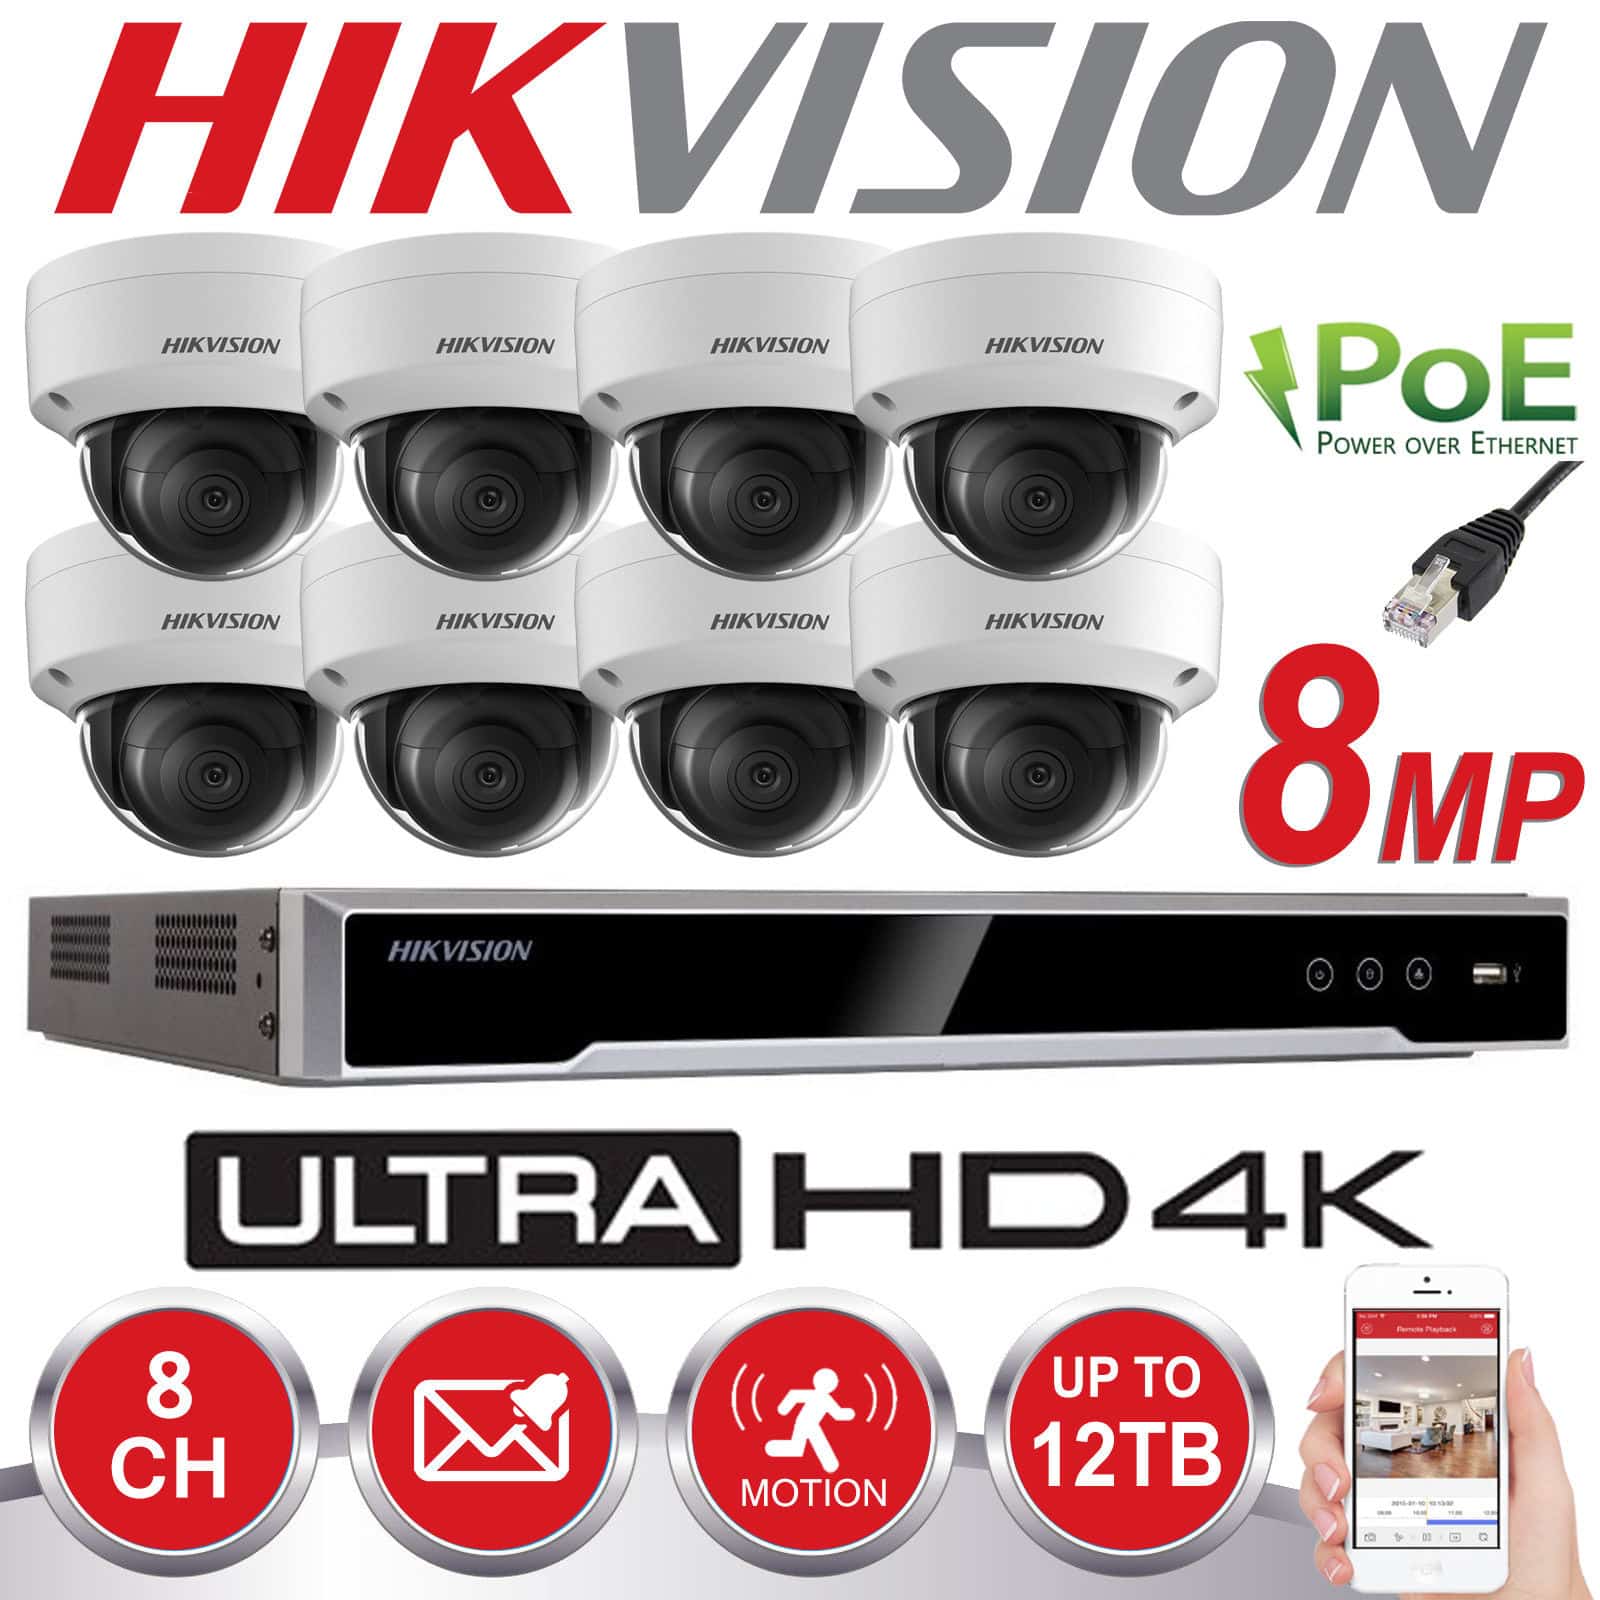 HIKVISION 8MP CCTV 4K UHD DVR 4CH 8CH SYSTEM IN/OUTDOOR 8MP CAMERA SECURITY KIT 